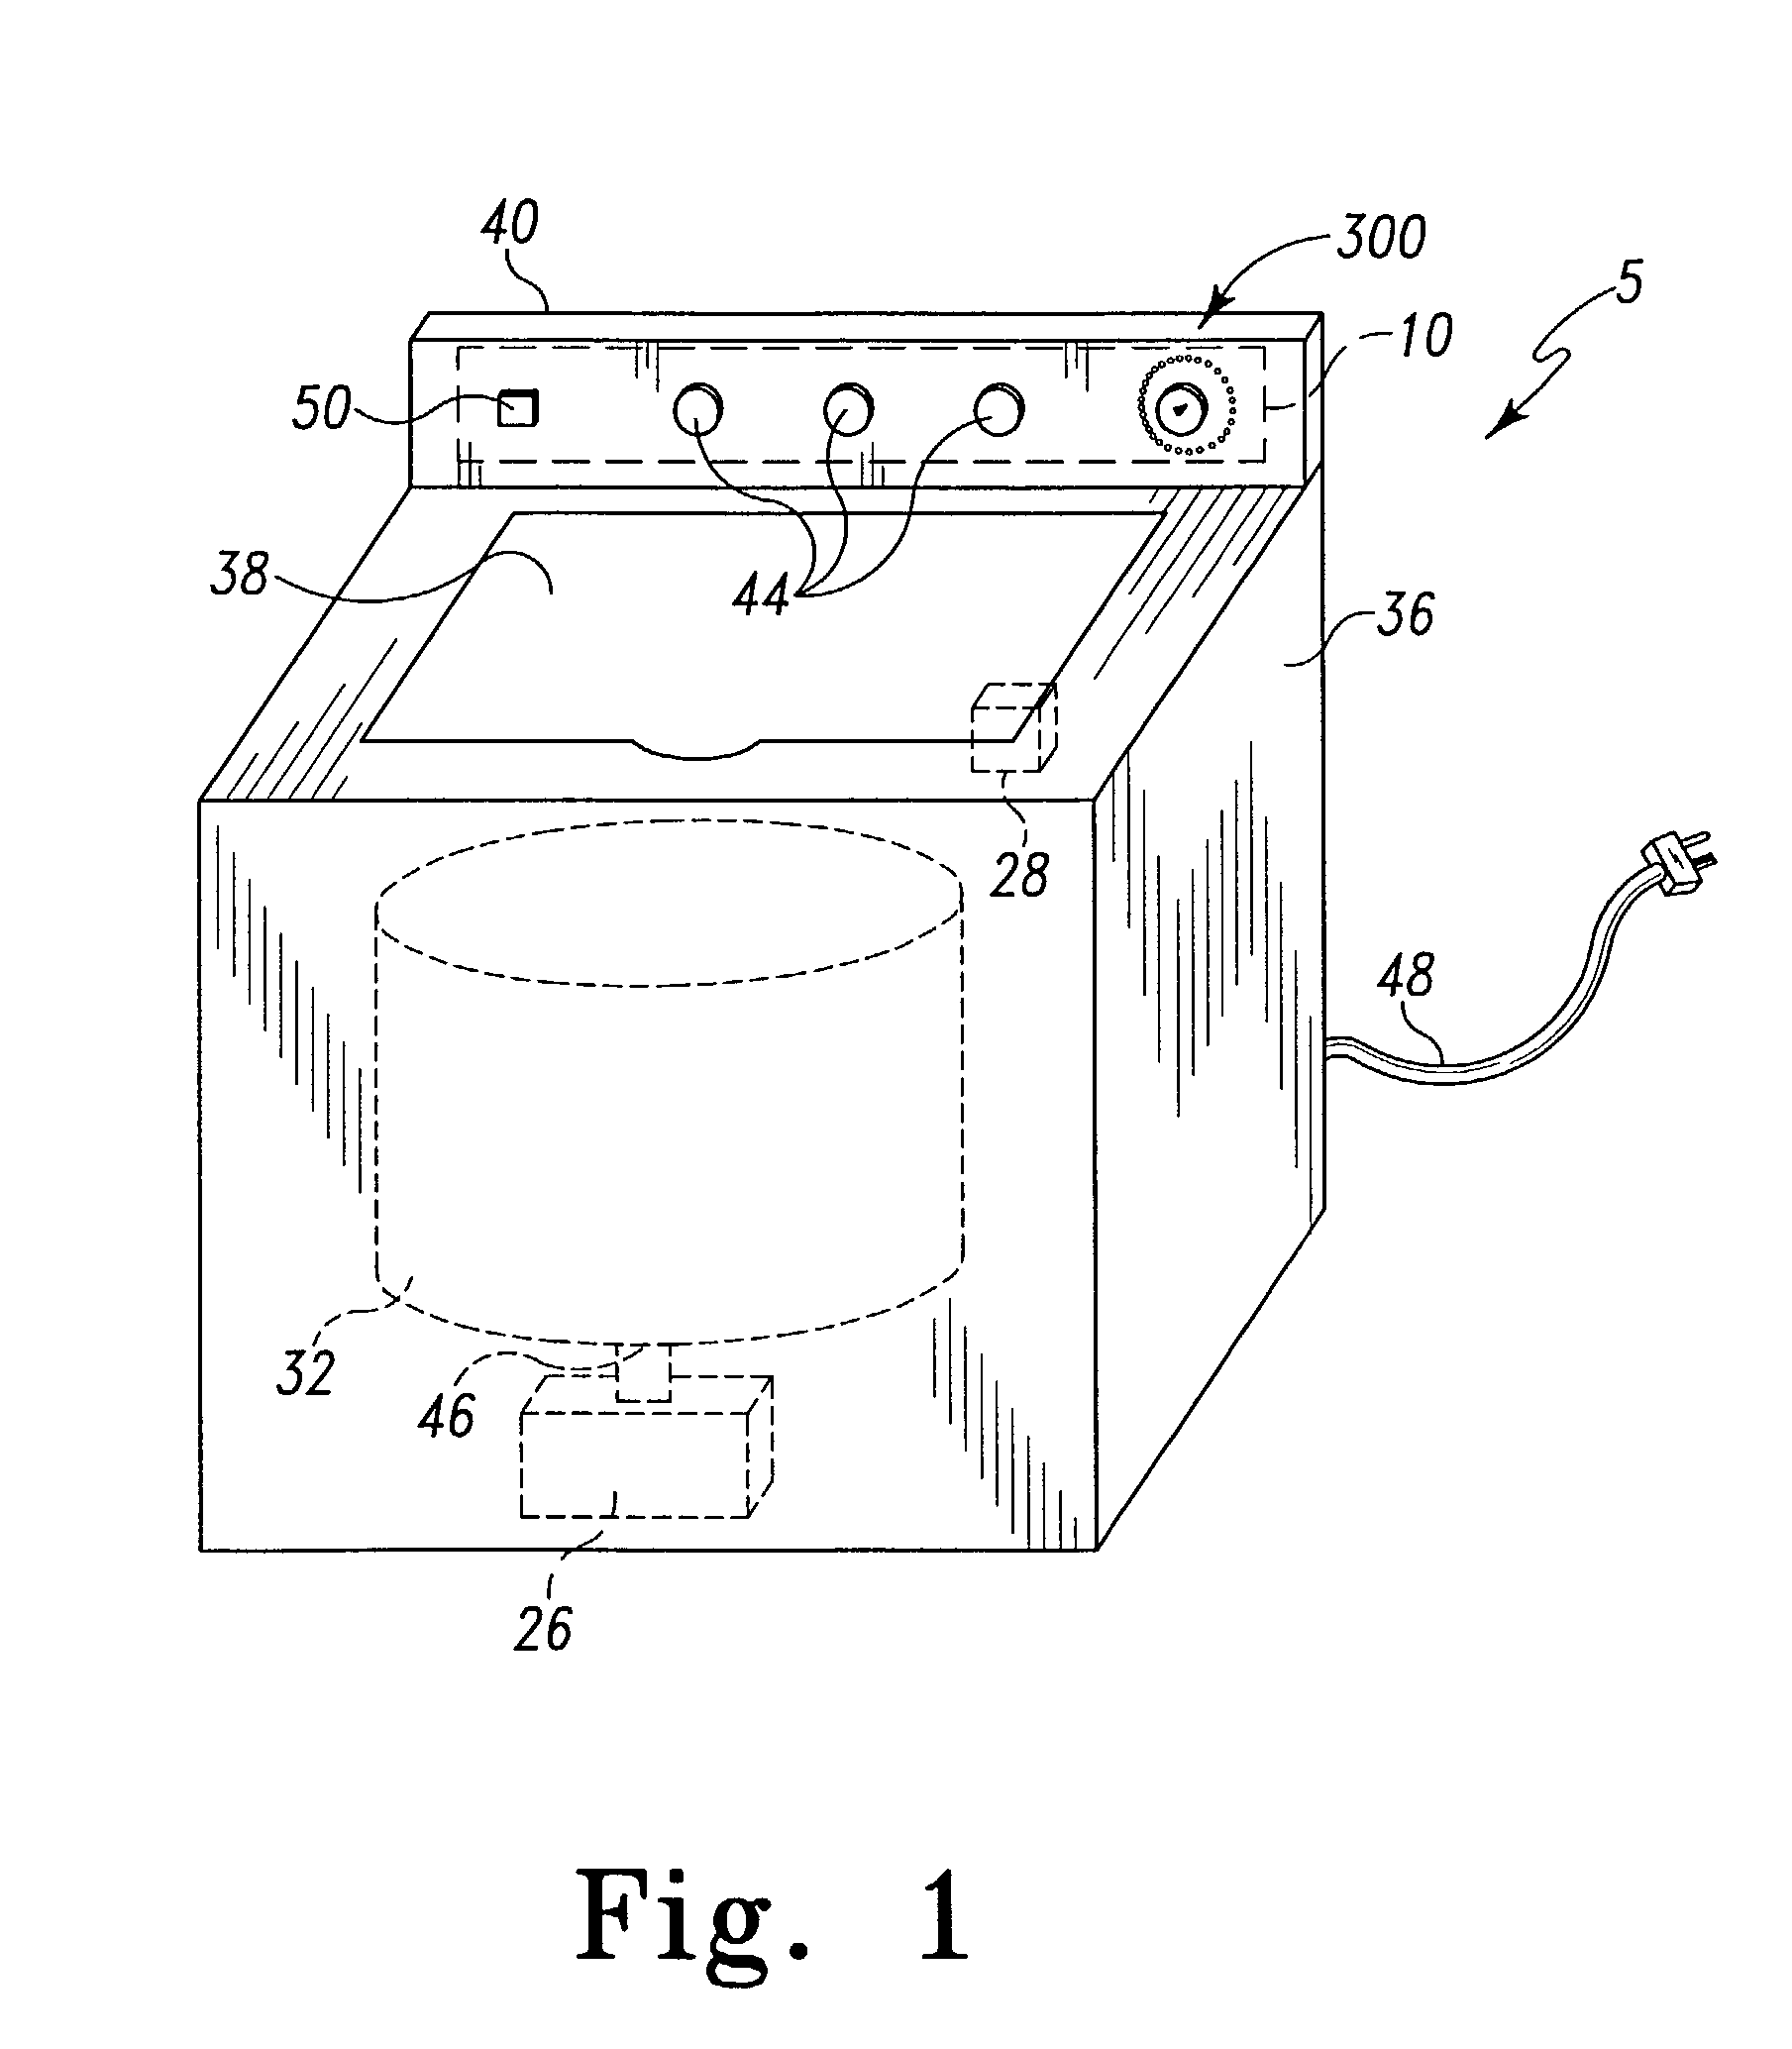 Appliance control system with hyperspin mode